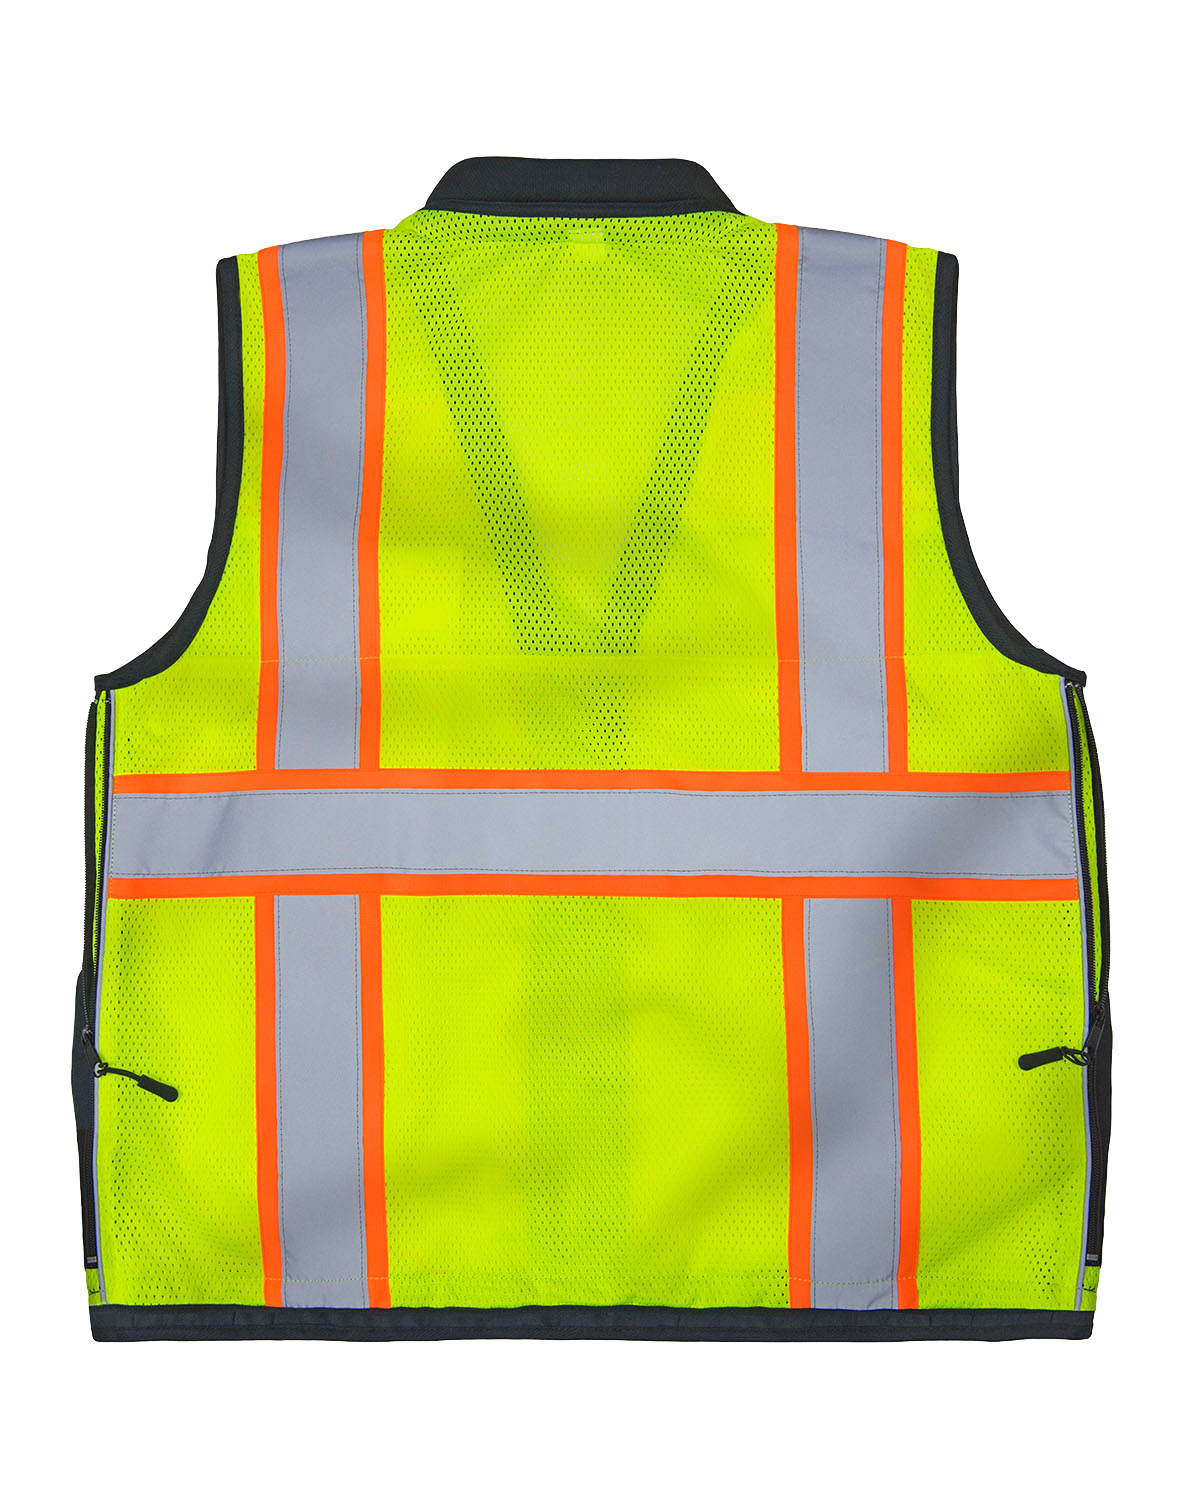 Picture of Max Apparel MAX490 Class 2 Deluxe Surveyors Vest, Safety Green/Black